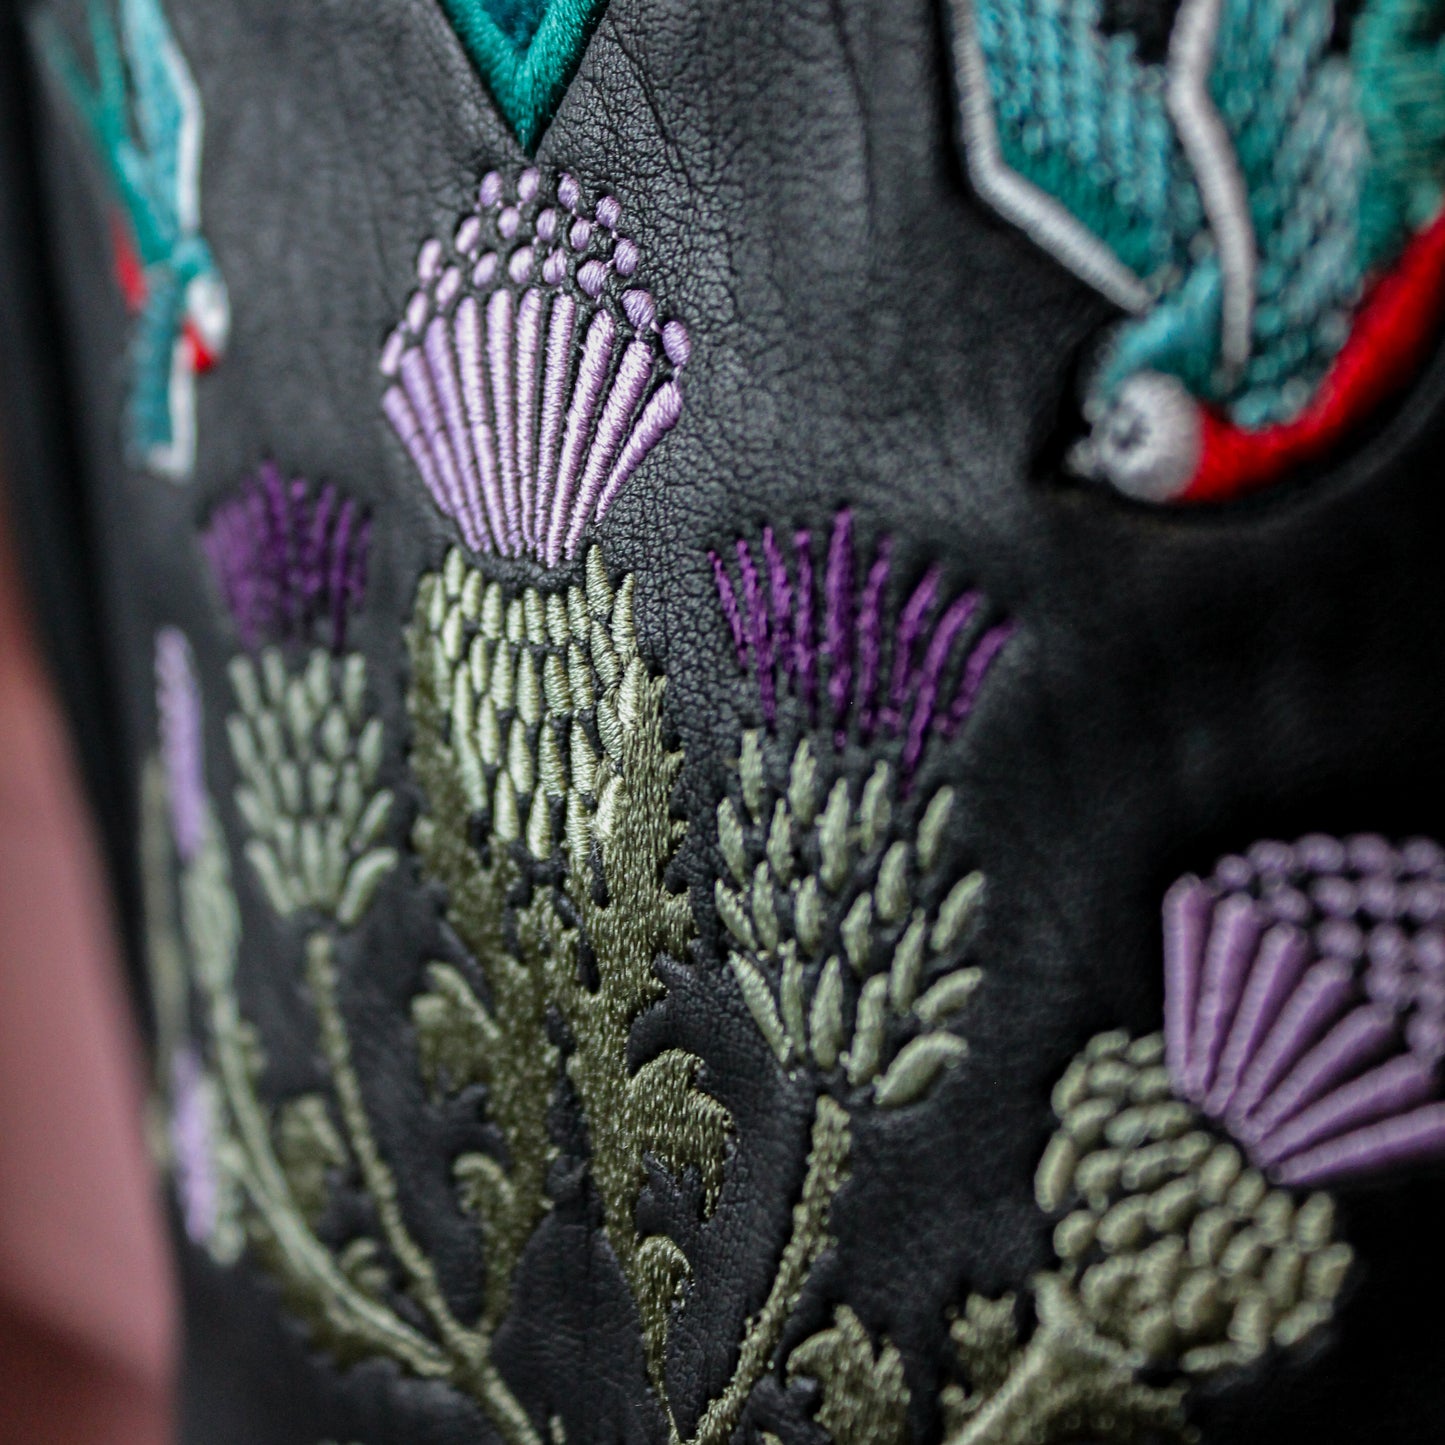 Personalized bride jacket, featuring intricate embroidery on luxurious leather